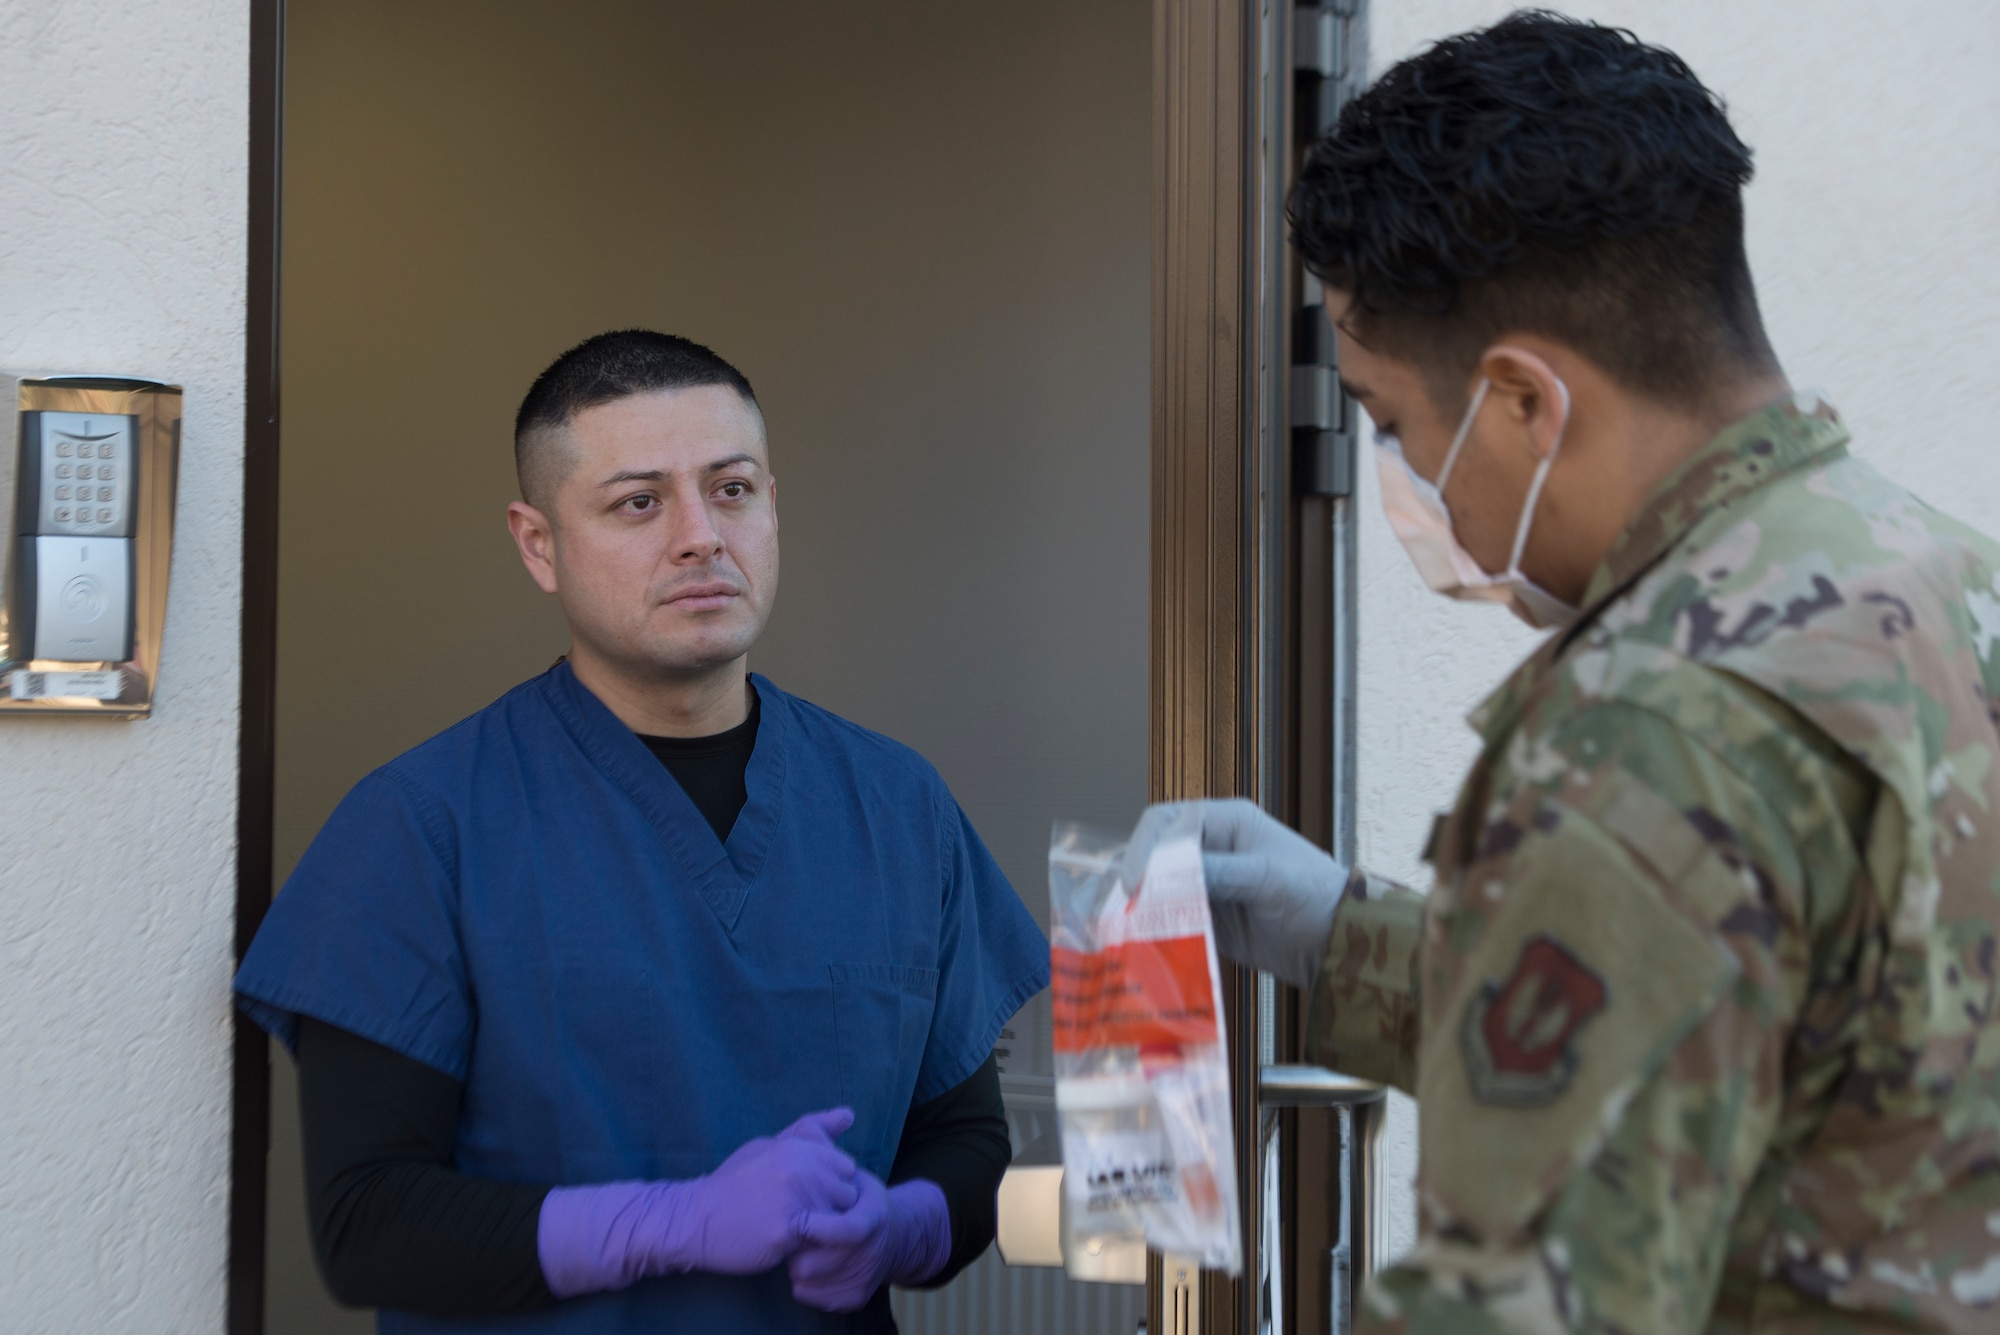 An Airman receives medical materials from a colleague.